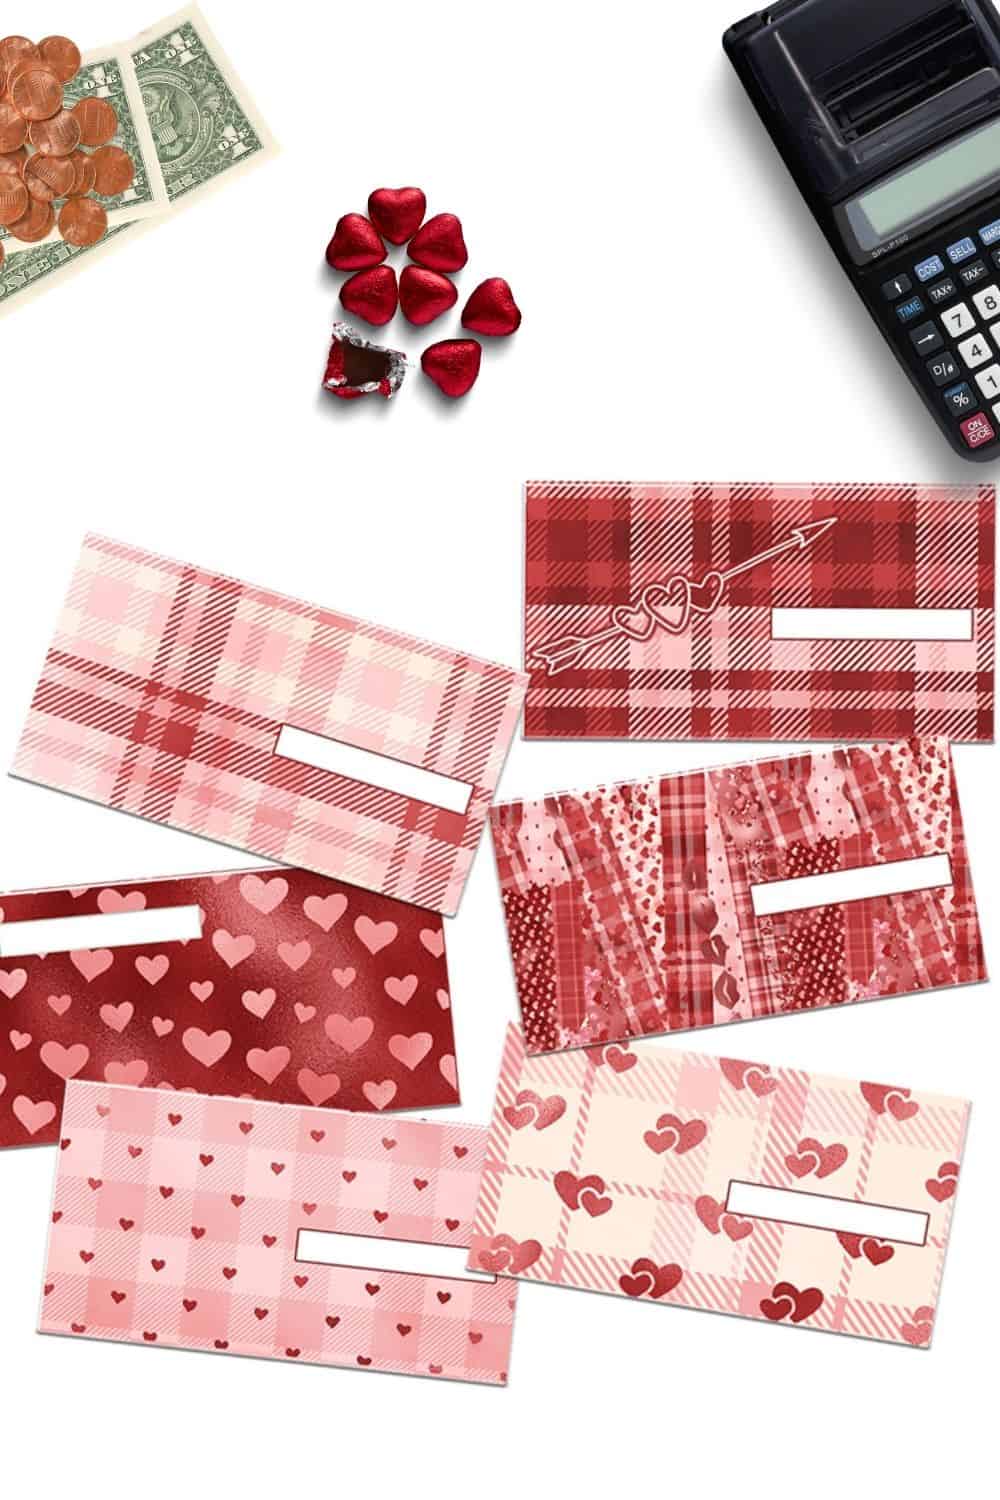 Check out our St Valentine's Day cash envelopes sets. Different styles to fit your needs. Wallet size fit. Prices are ranging from $0 and up. via @mystayathome